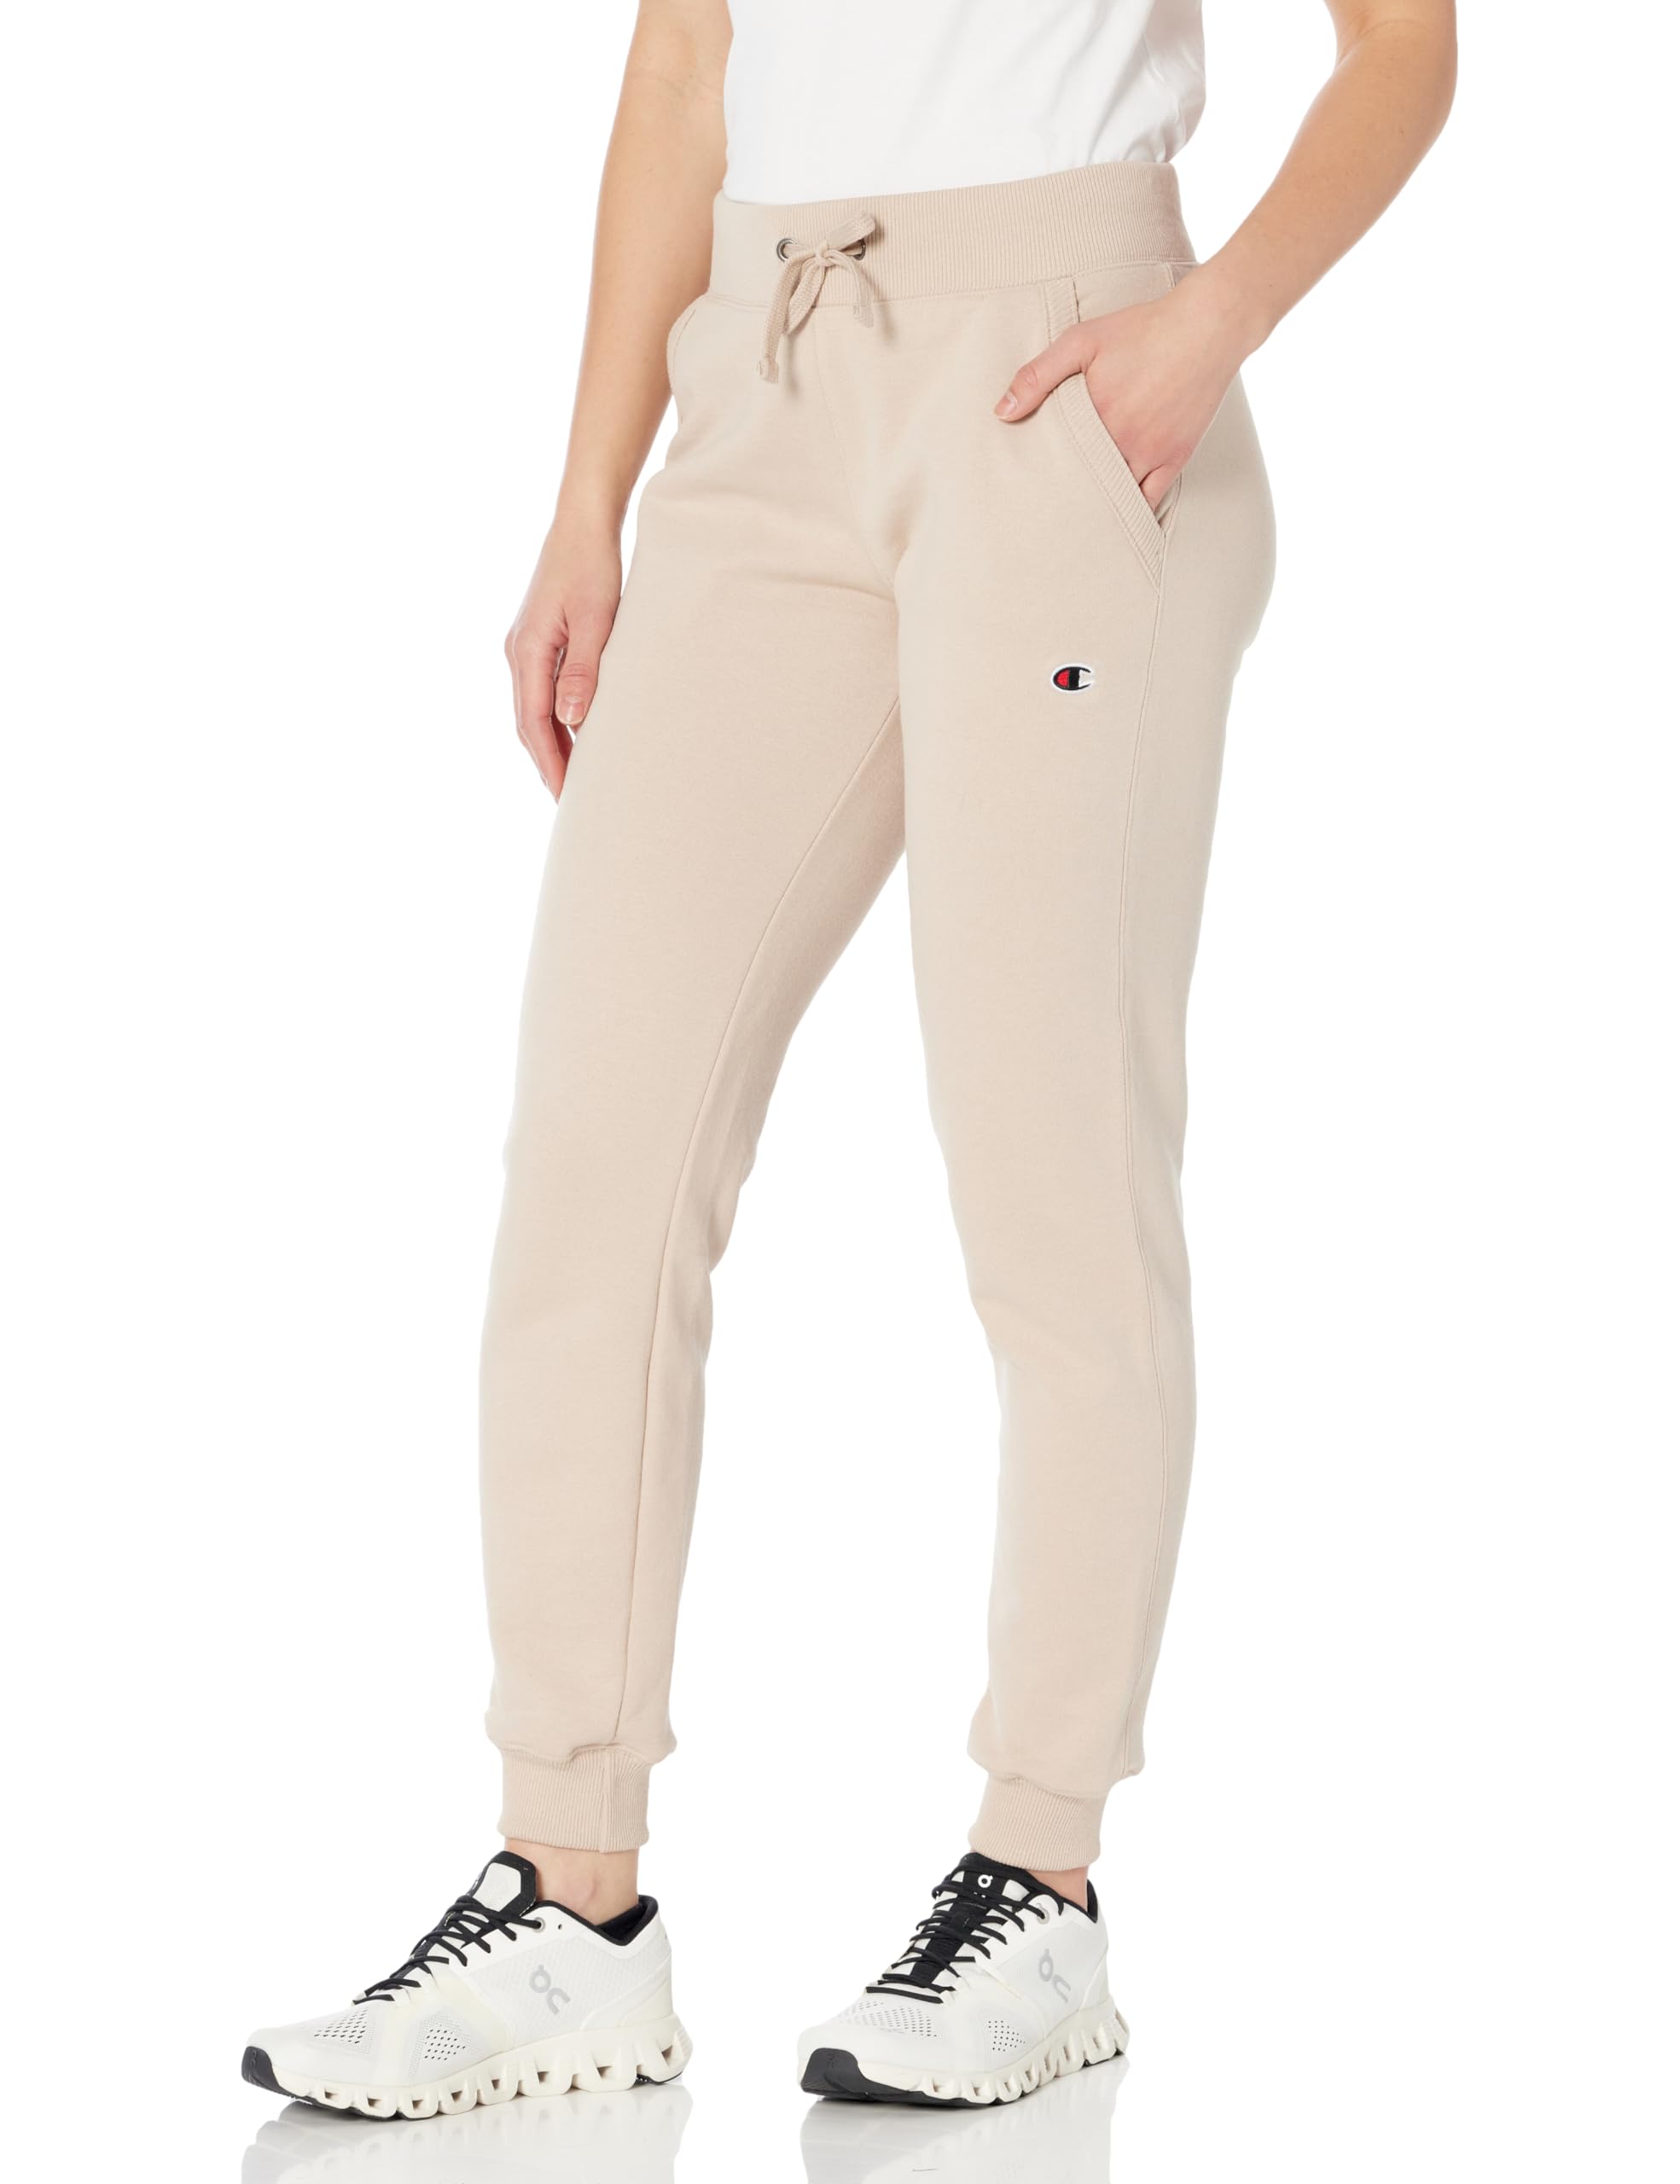 Champion Women's Joggers, Powerblend, Fleece, Warm and Comfortable Joggers for Women, 29